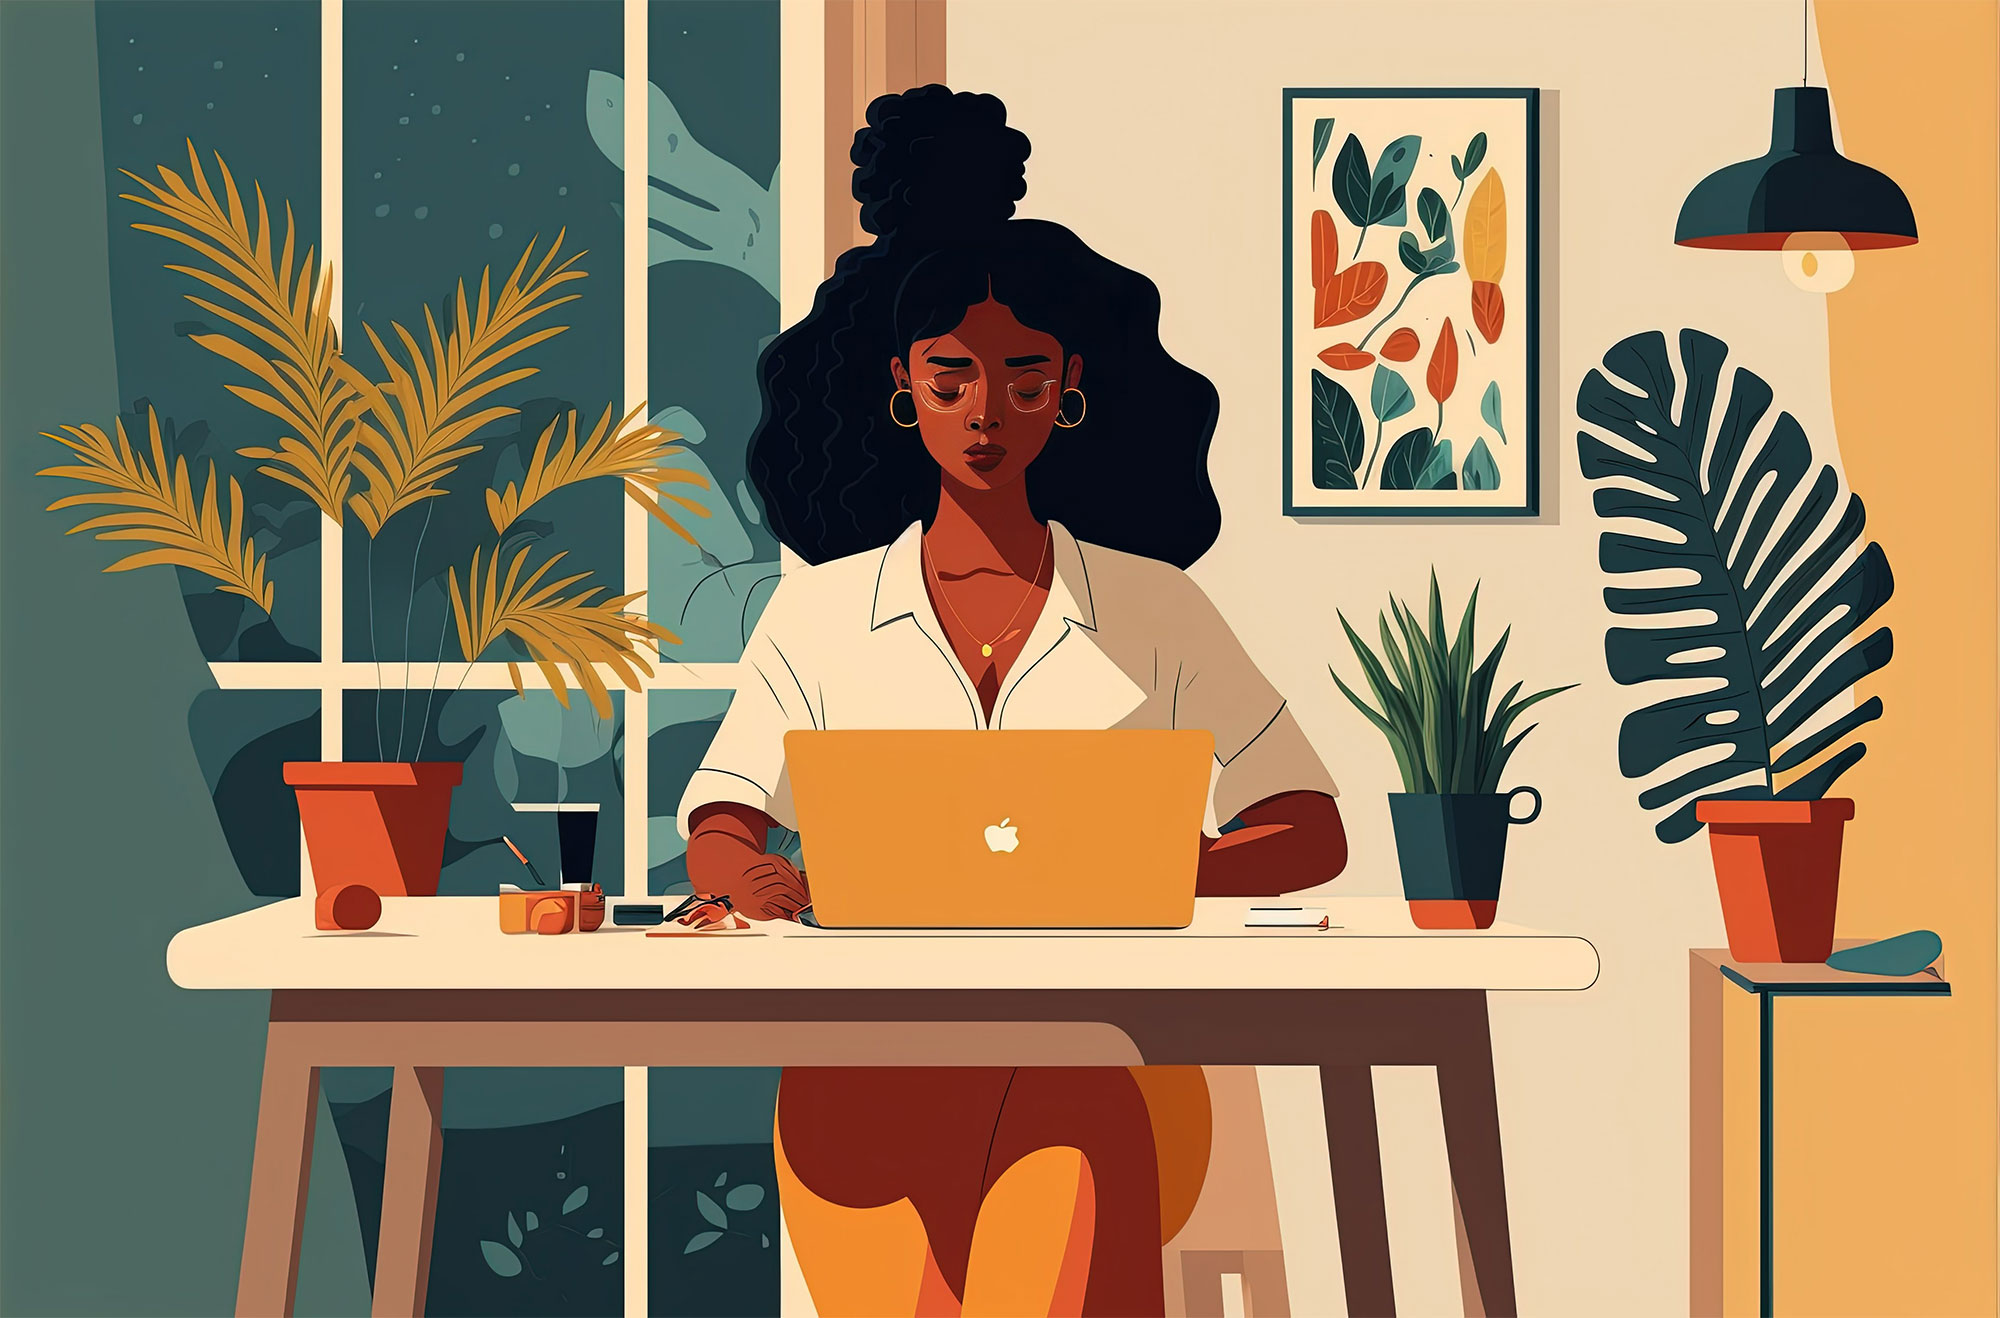 Colorful illustration of a Black person sitting down at their desk on a laptop. They are surrounded by plants and behind them is a large window.